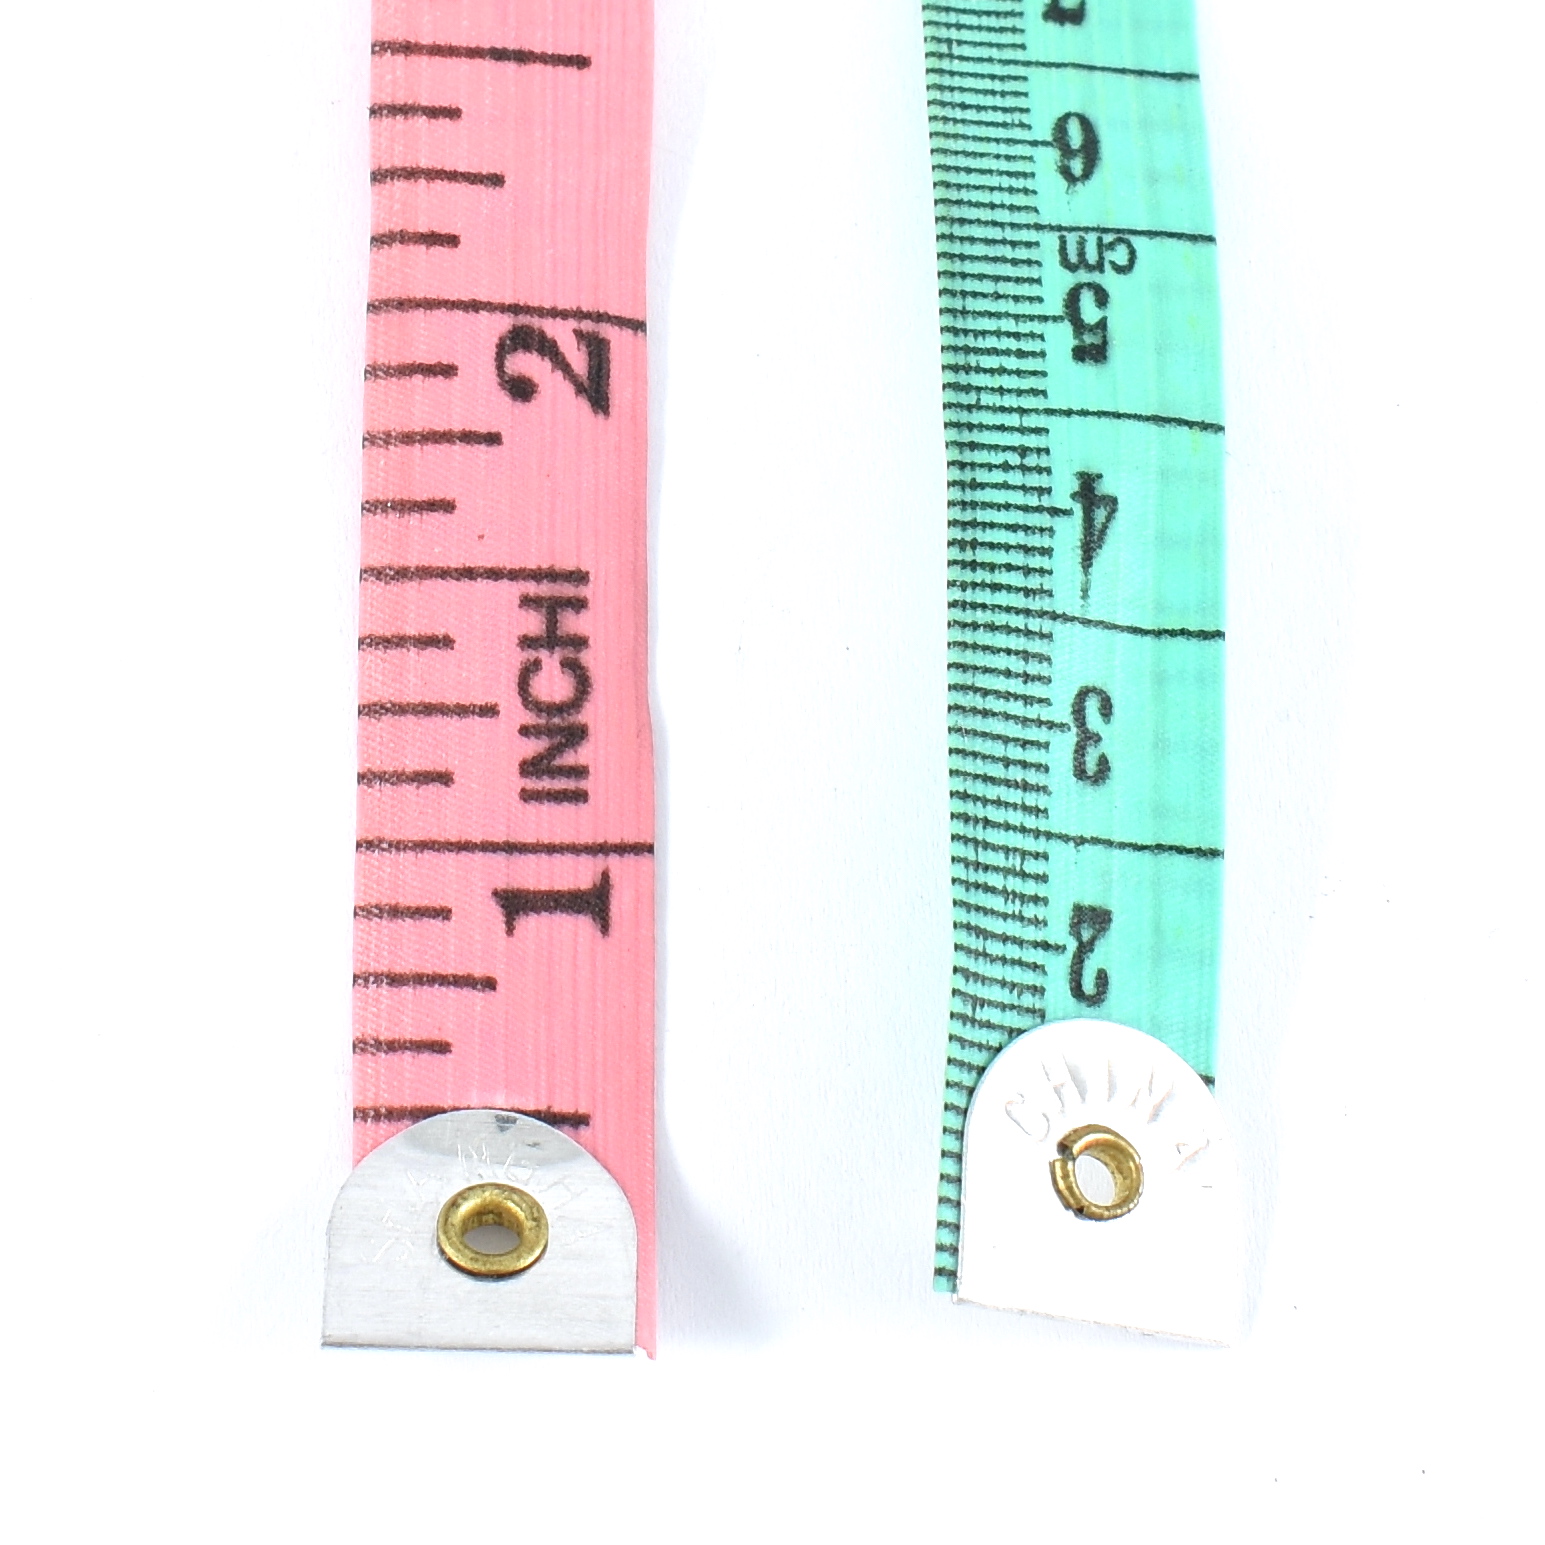 60 Inch/150 CM Tape Measure, GXJTAPE Iridescent Measuring Tape for